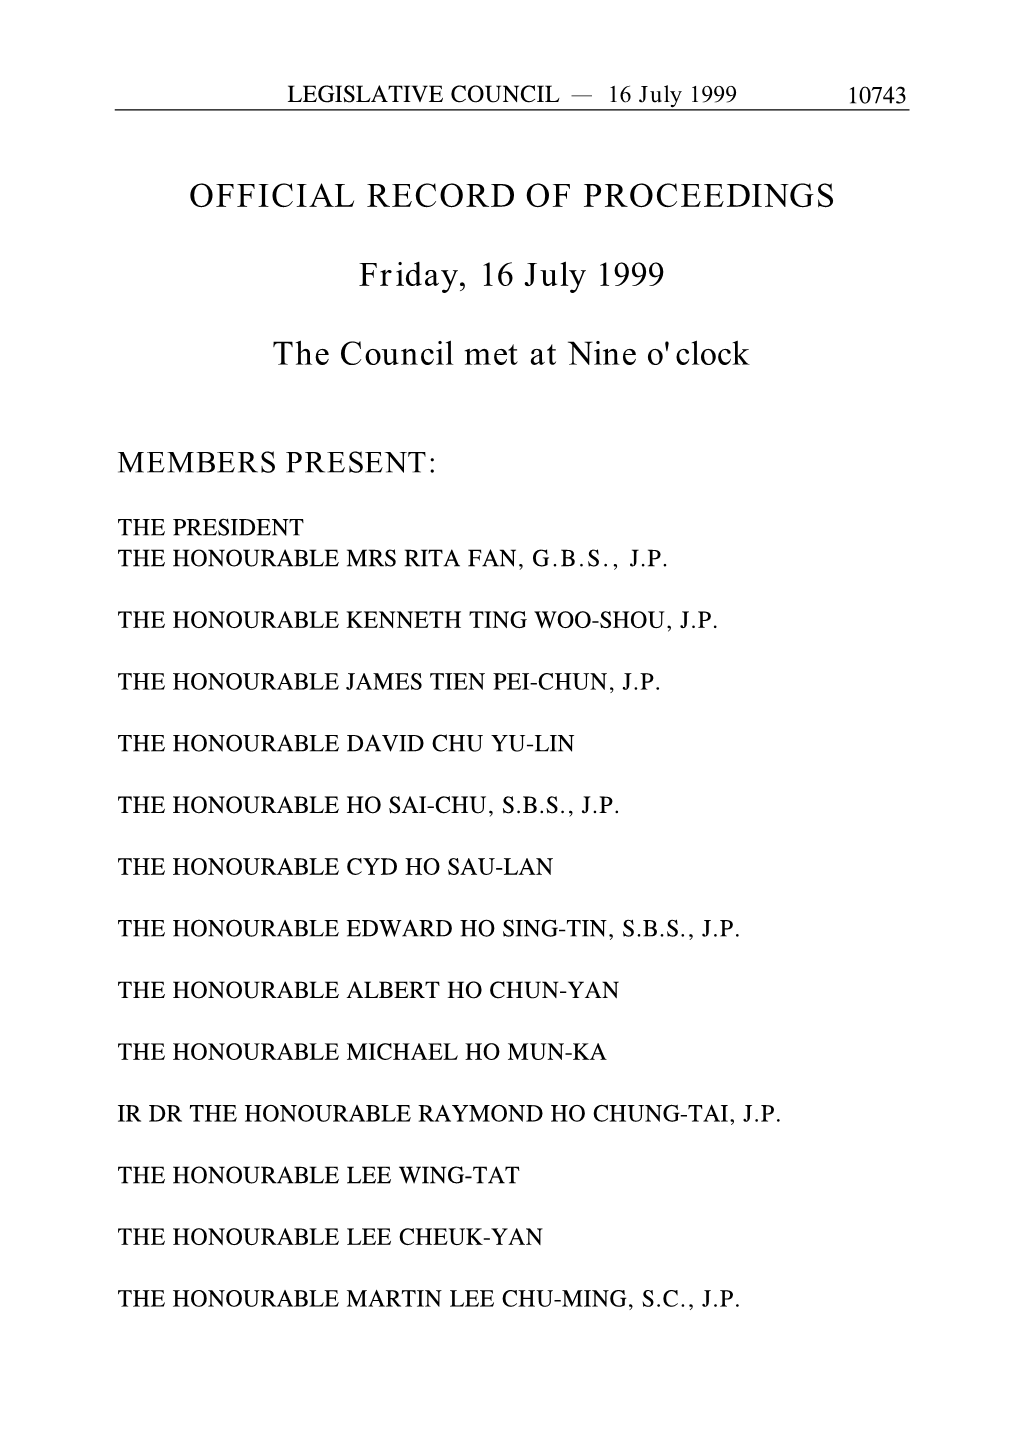 OFFICIAL RECORD of PROCEEDINGS Friday, 16 July